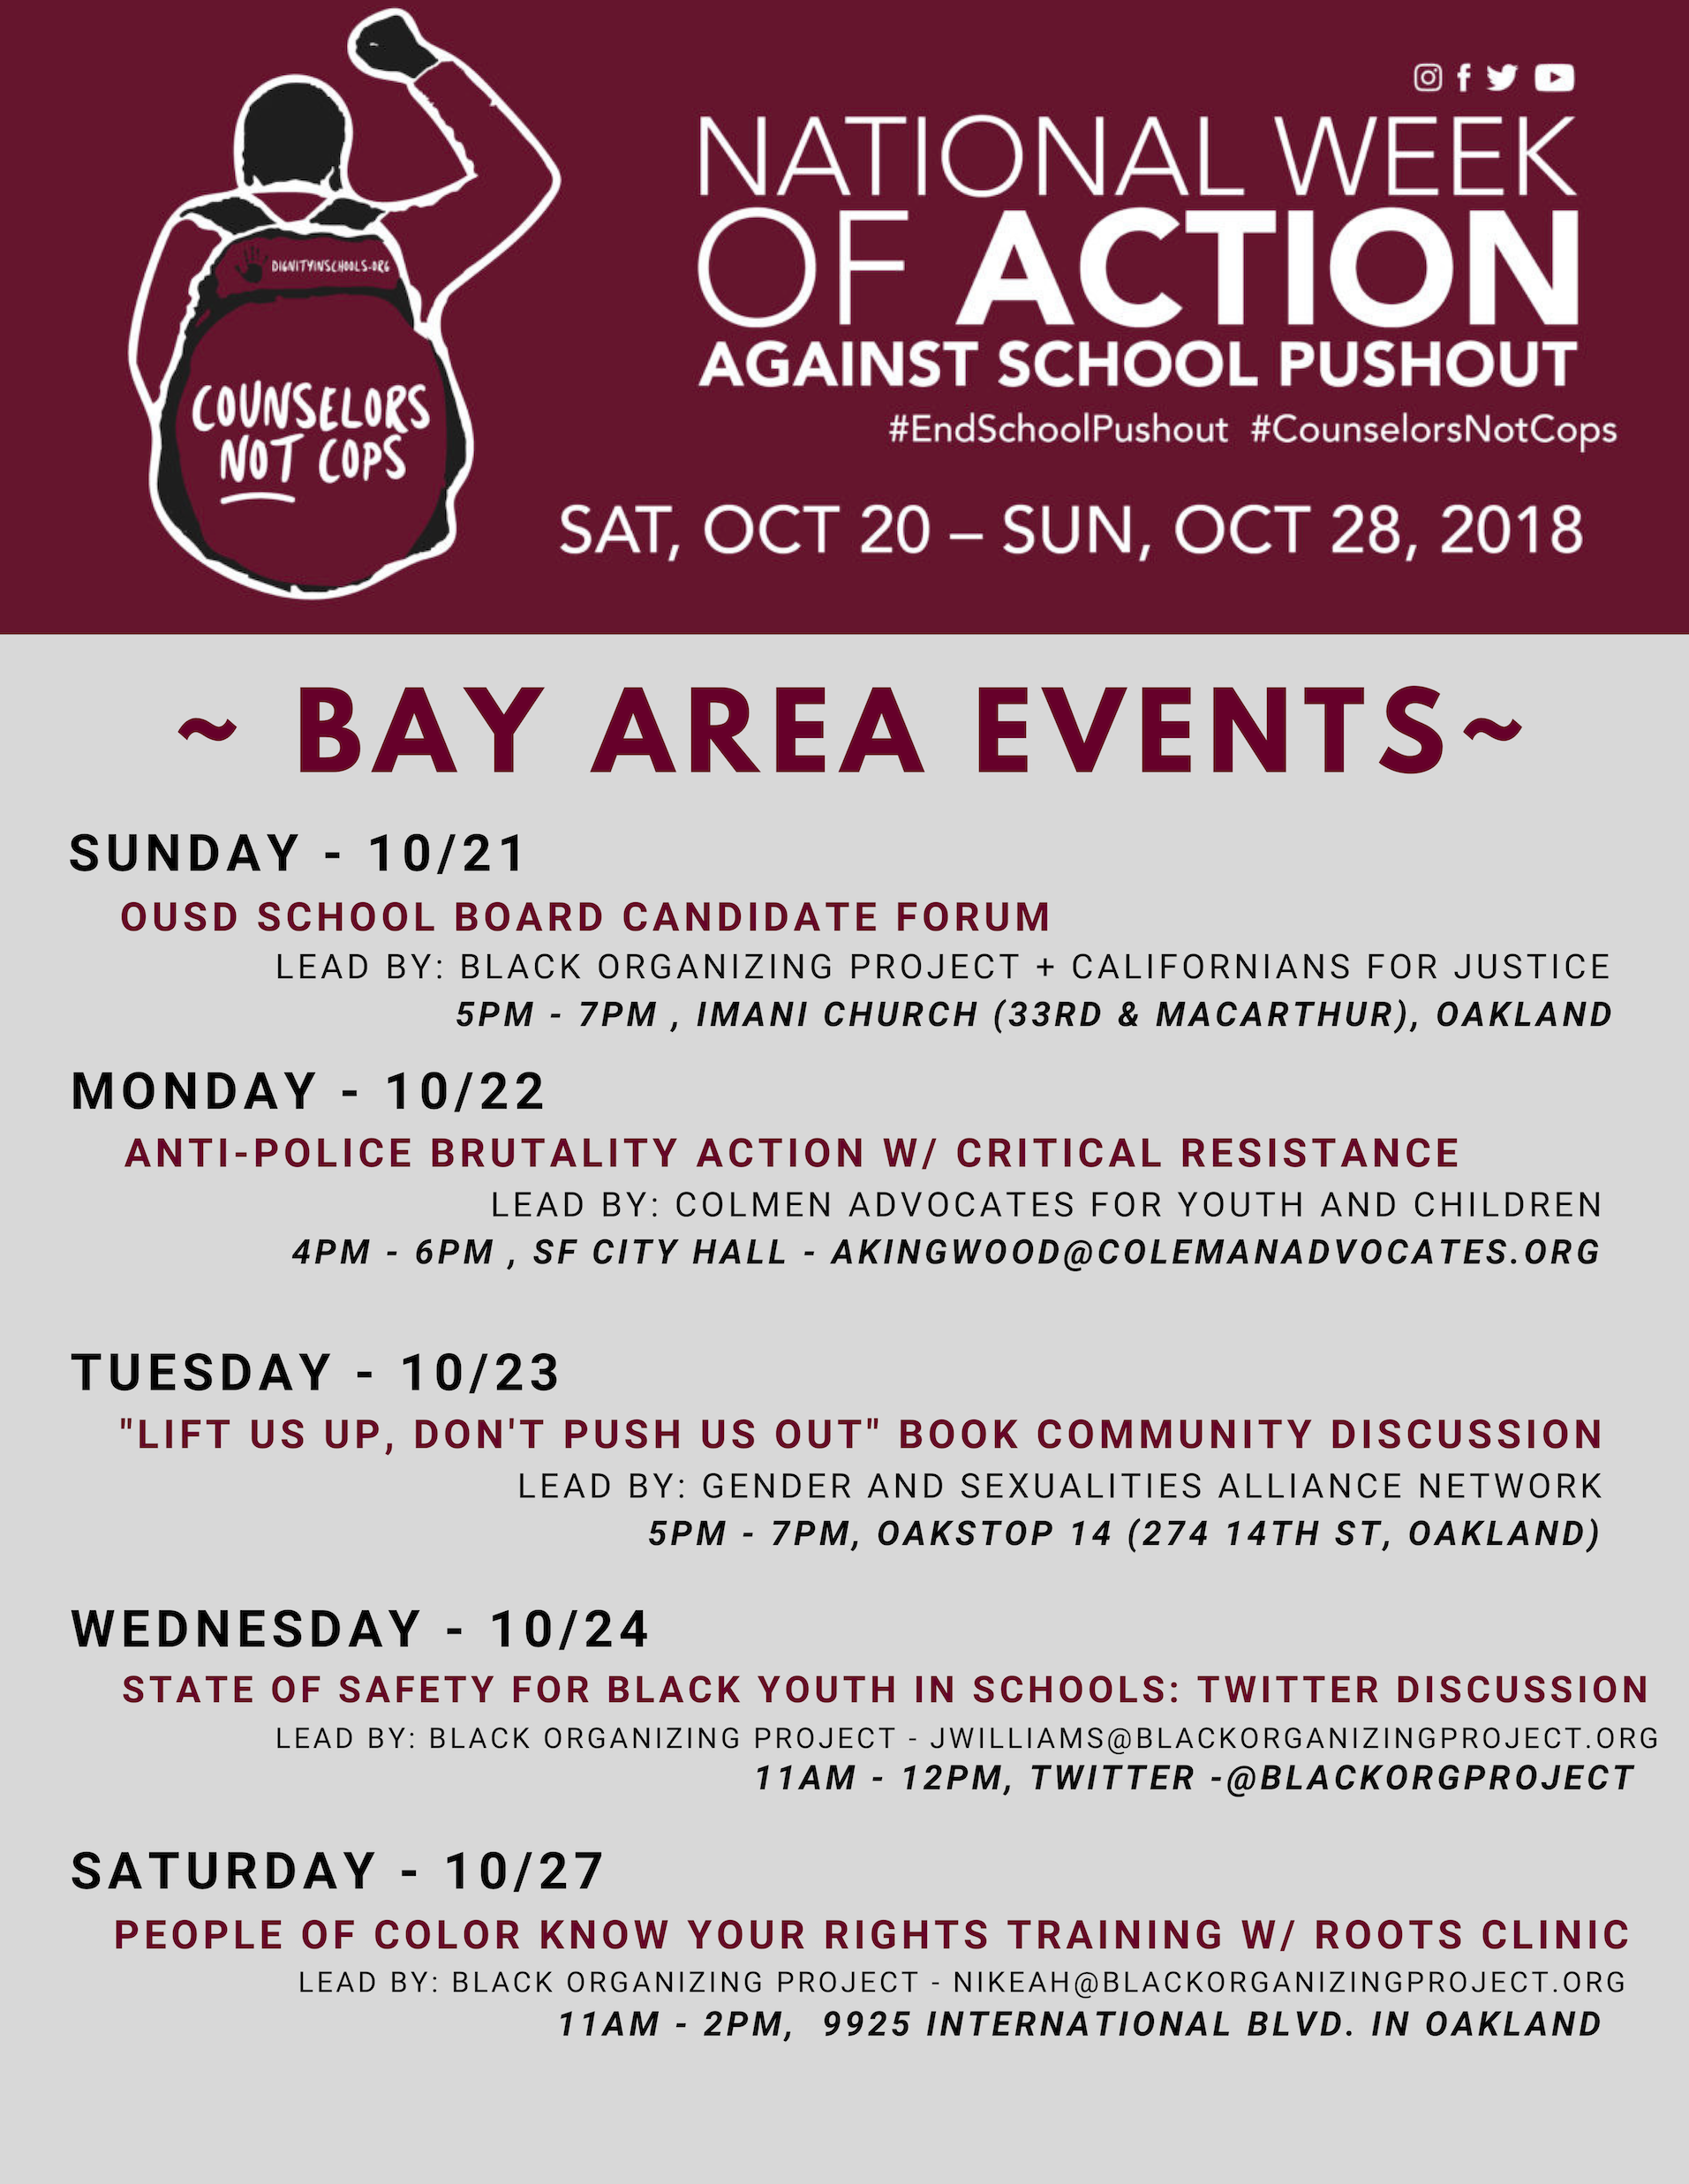 BAY AREA EVENTS~ SUNDAY - 10/21 OUSD SCHOOL BOARD CANDIDATE FORUM LEAD BY: BLACK ORGANIZING PROJECT + CALIFORNIANS FOR JUSTICE 5PM - 7PM , IMANI CHURCH (33RD & MACARTHUR), OAKLAND MONDAY - 10/22 ANTI-POLICE BRUTALITY ACTION W/ CRITICAL RESISTANCE LEAD BY: COLMEN ADVOCATES FOR YOUTH AND CHILDREN 4PM - 6PM , SF CITY HALL - AKINGWOOD@COLEMANADVOCATES.ORG TUESDAY - 10/23 "LIFT US UP, DON'T PUSH US OUT" BOOK COMMUNITY DISCUSSION LEAD BY: GENDER AND SEXUALITIES ALLIANCE NETWORK 5PM - 7PM, OAKSTOP 14 (274 14TH ST, OAKLAND) WEDNESDAY - 10/24 STATE OF SAFETY FOR BLACK YOUTH IN SCHOOLS: TWITTER DISCUSSION LEAD BY: BLACK ORGANIZING PROJECT - JWILLIAMS@BLACKORGANIZINGPROJECT.ORG 11AM - 12PM, TWITTER -@BLACKORGPROJECT SATURDAY - 10/27 PEOPLE OF COLOR KNOW YOUR RIGHTS TRAINING W/ ROOTS CLINIC LEAD BY: BLACK ORGANIZING PROJECT - NIKEAH@BLACKORGANIZINGPROJECT.ORG 11AM - 2PM, 9925 INTERNATIONAL BLVD. IN OAKLAND